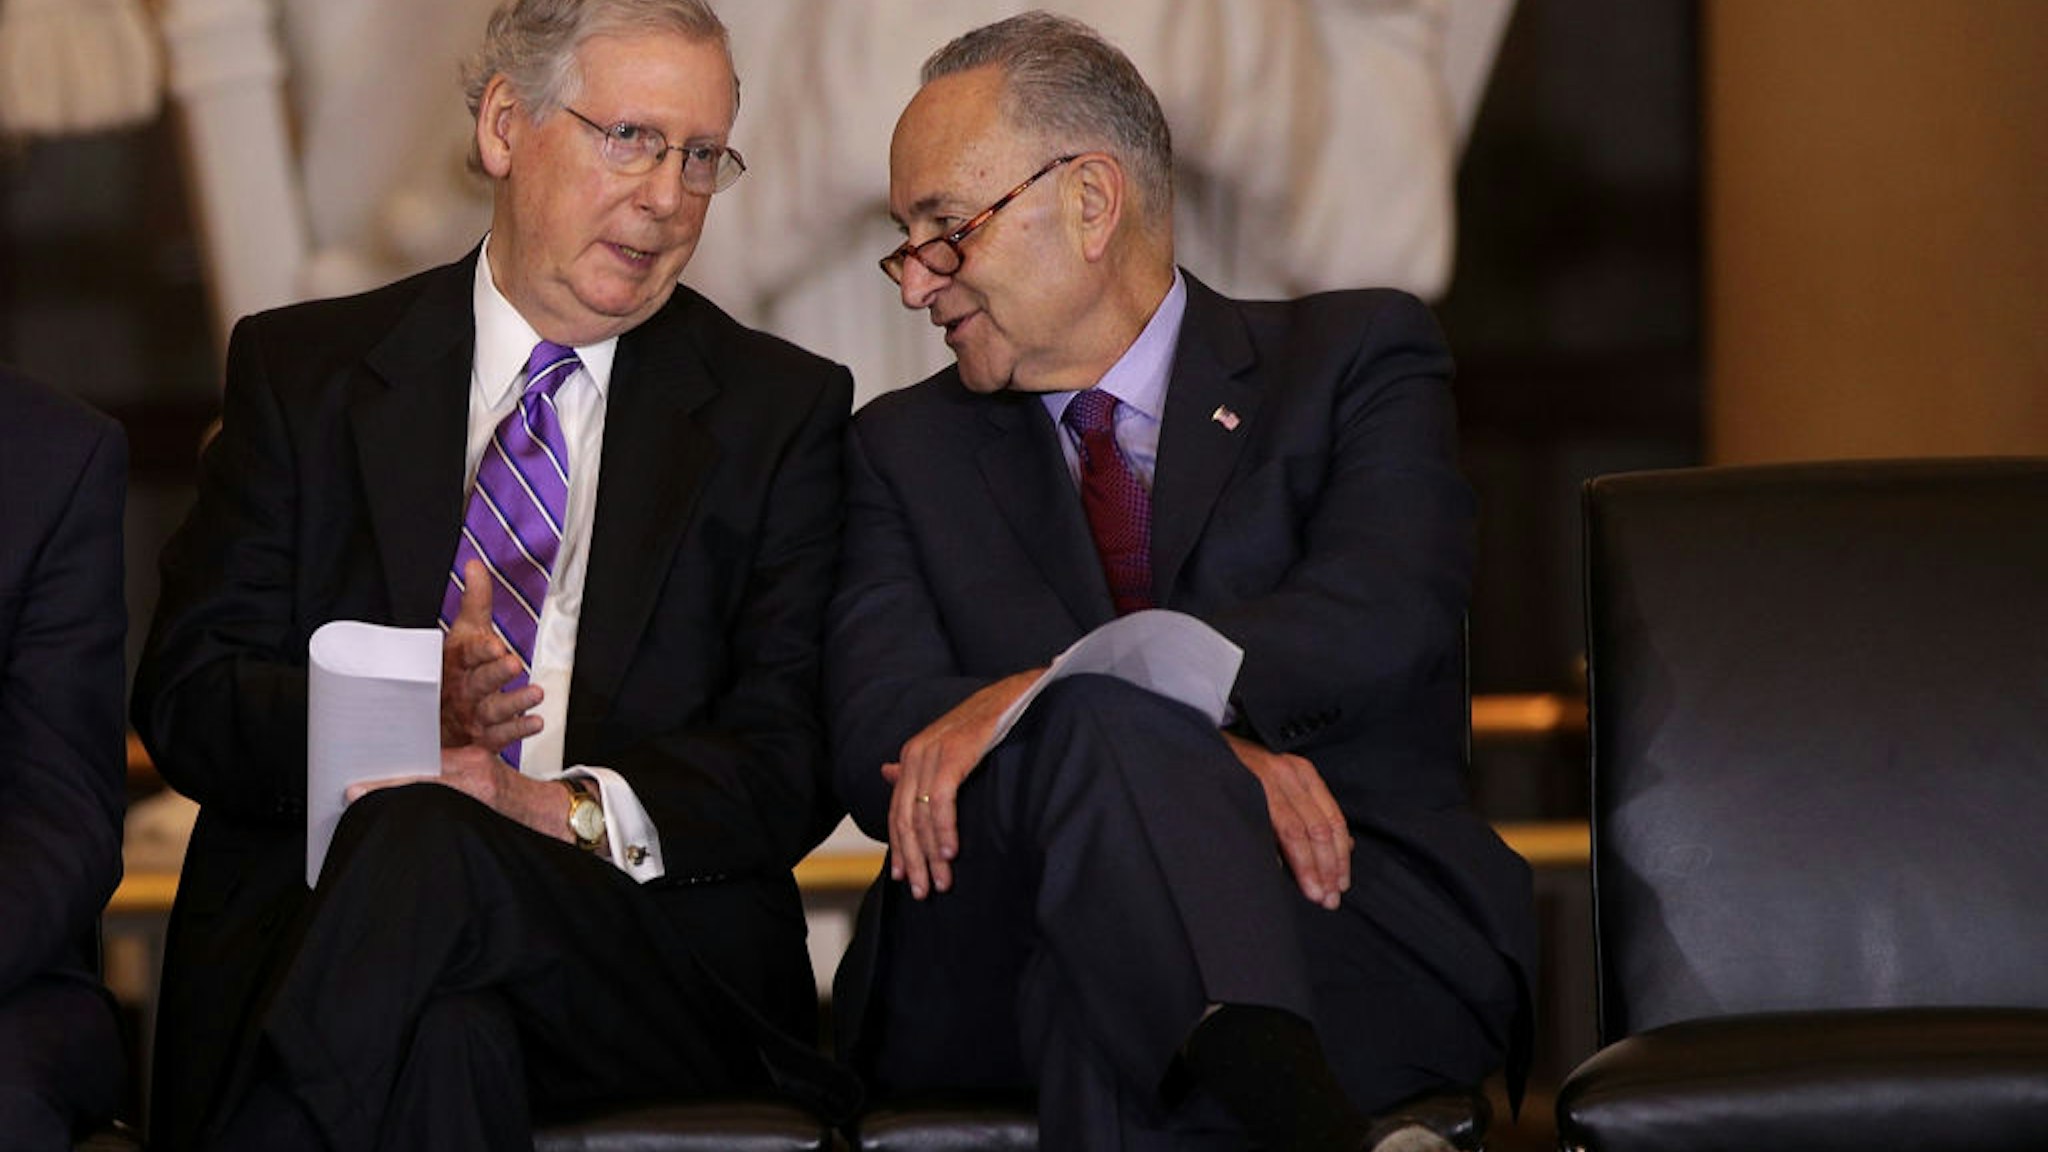 WASHINGTON, DC - OCTOBER 25: U.S. U.S. Senate Majority Leader Sen. Mitch McConnell (R-KY) (L) chats with Senate Minority Leader Sen. Chuck Schumer (D-NY) (R) during a Congressional Gold Medal presentation ceremony October 25, 2017 at the U.S. Capitol Visitor Center in Washington, DC. The medal is to honor Filipino veterans of World War II for their service and sacrifice during the war.